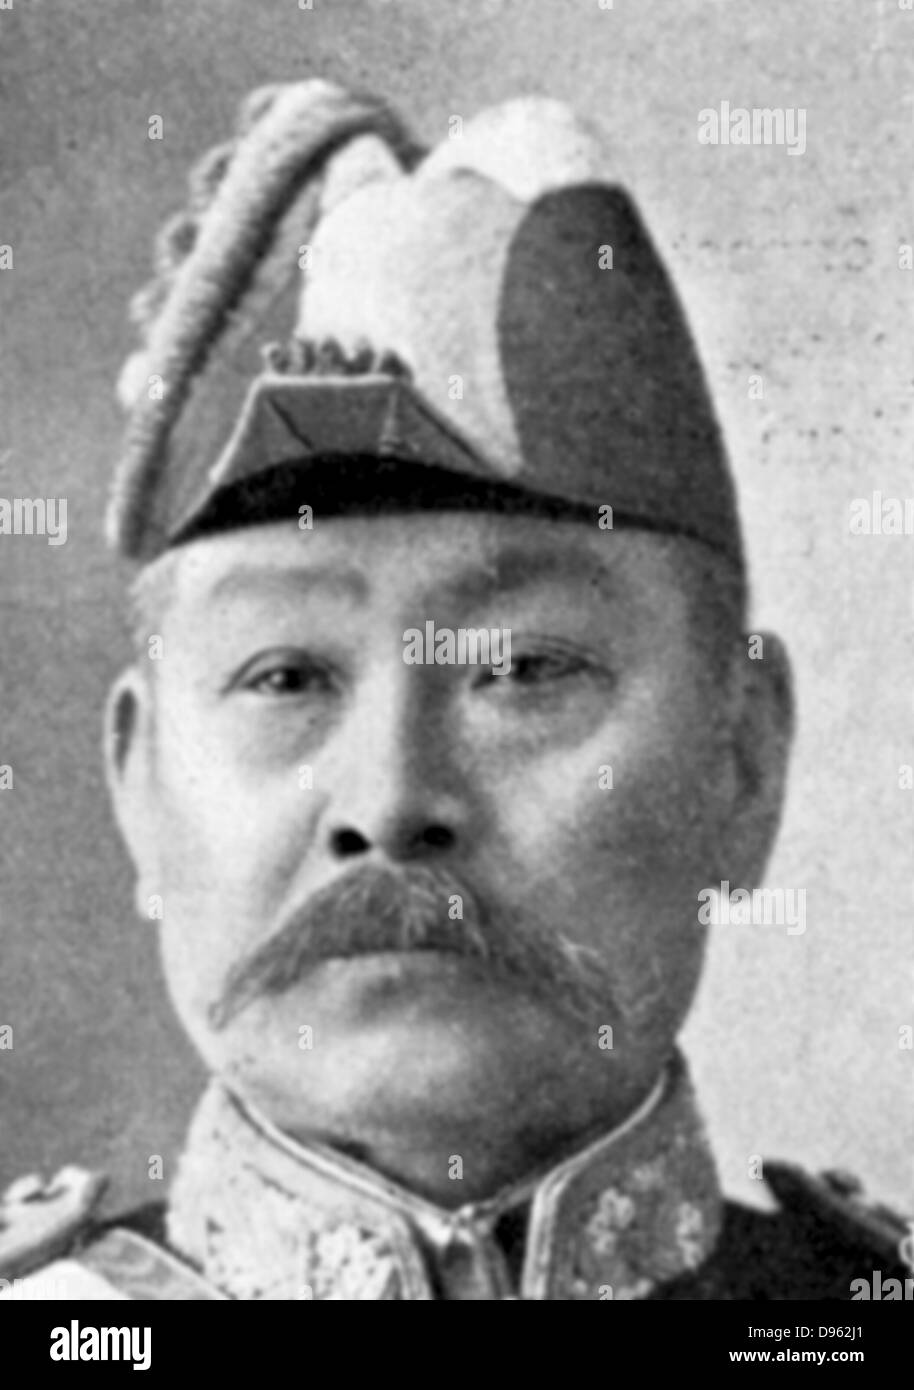 Admiral Ito, Commander-in-Chief Japanese fleet during war with China 1894-1895, Chief of Naval Board of Command during Russo-Japanese War 1904-1905. Stock Photo